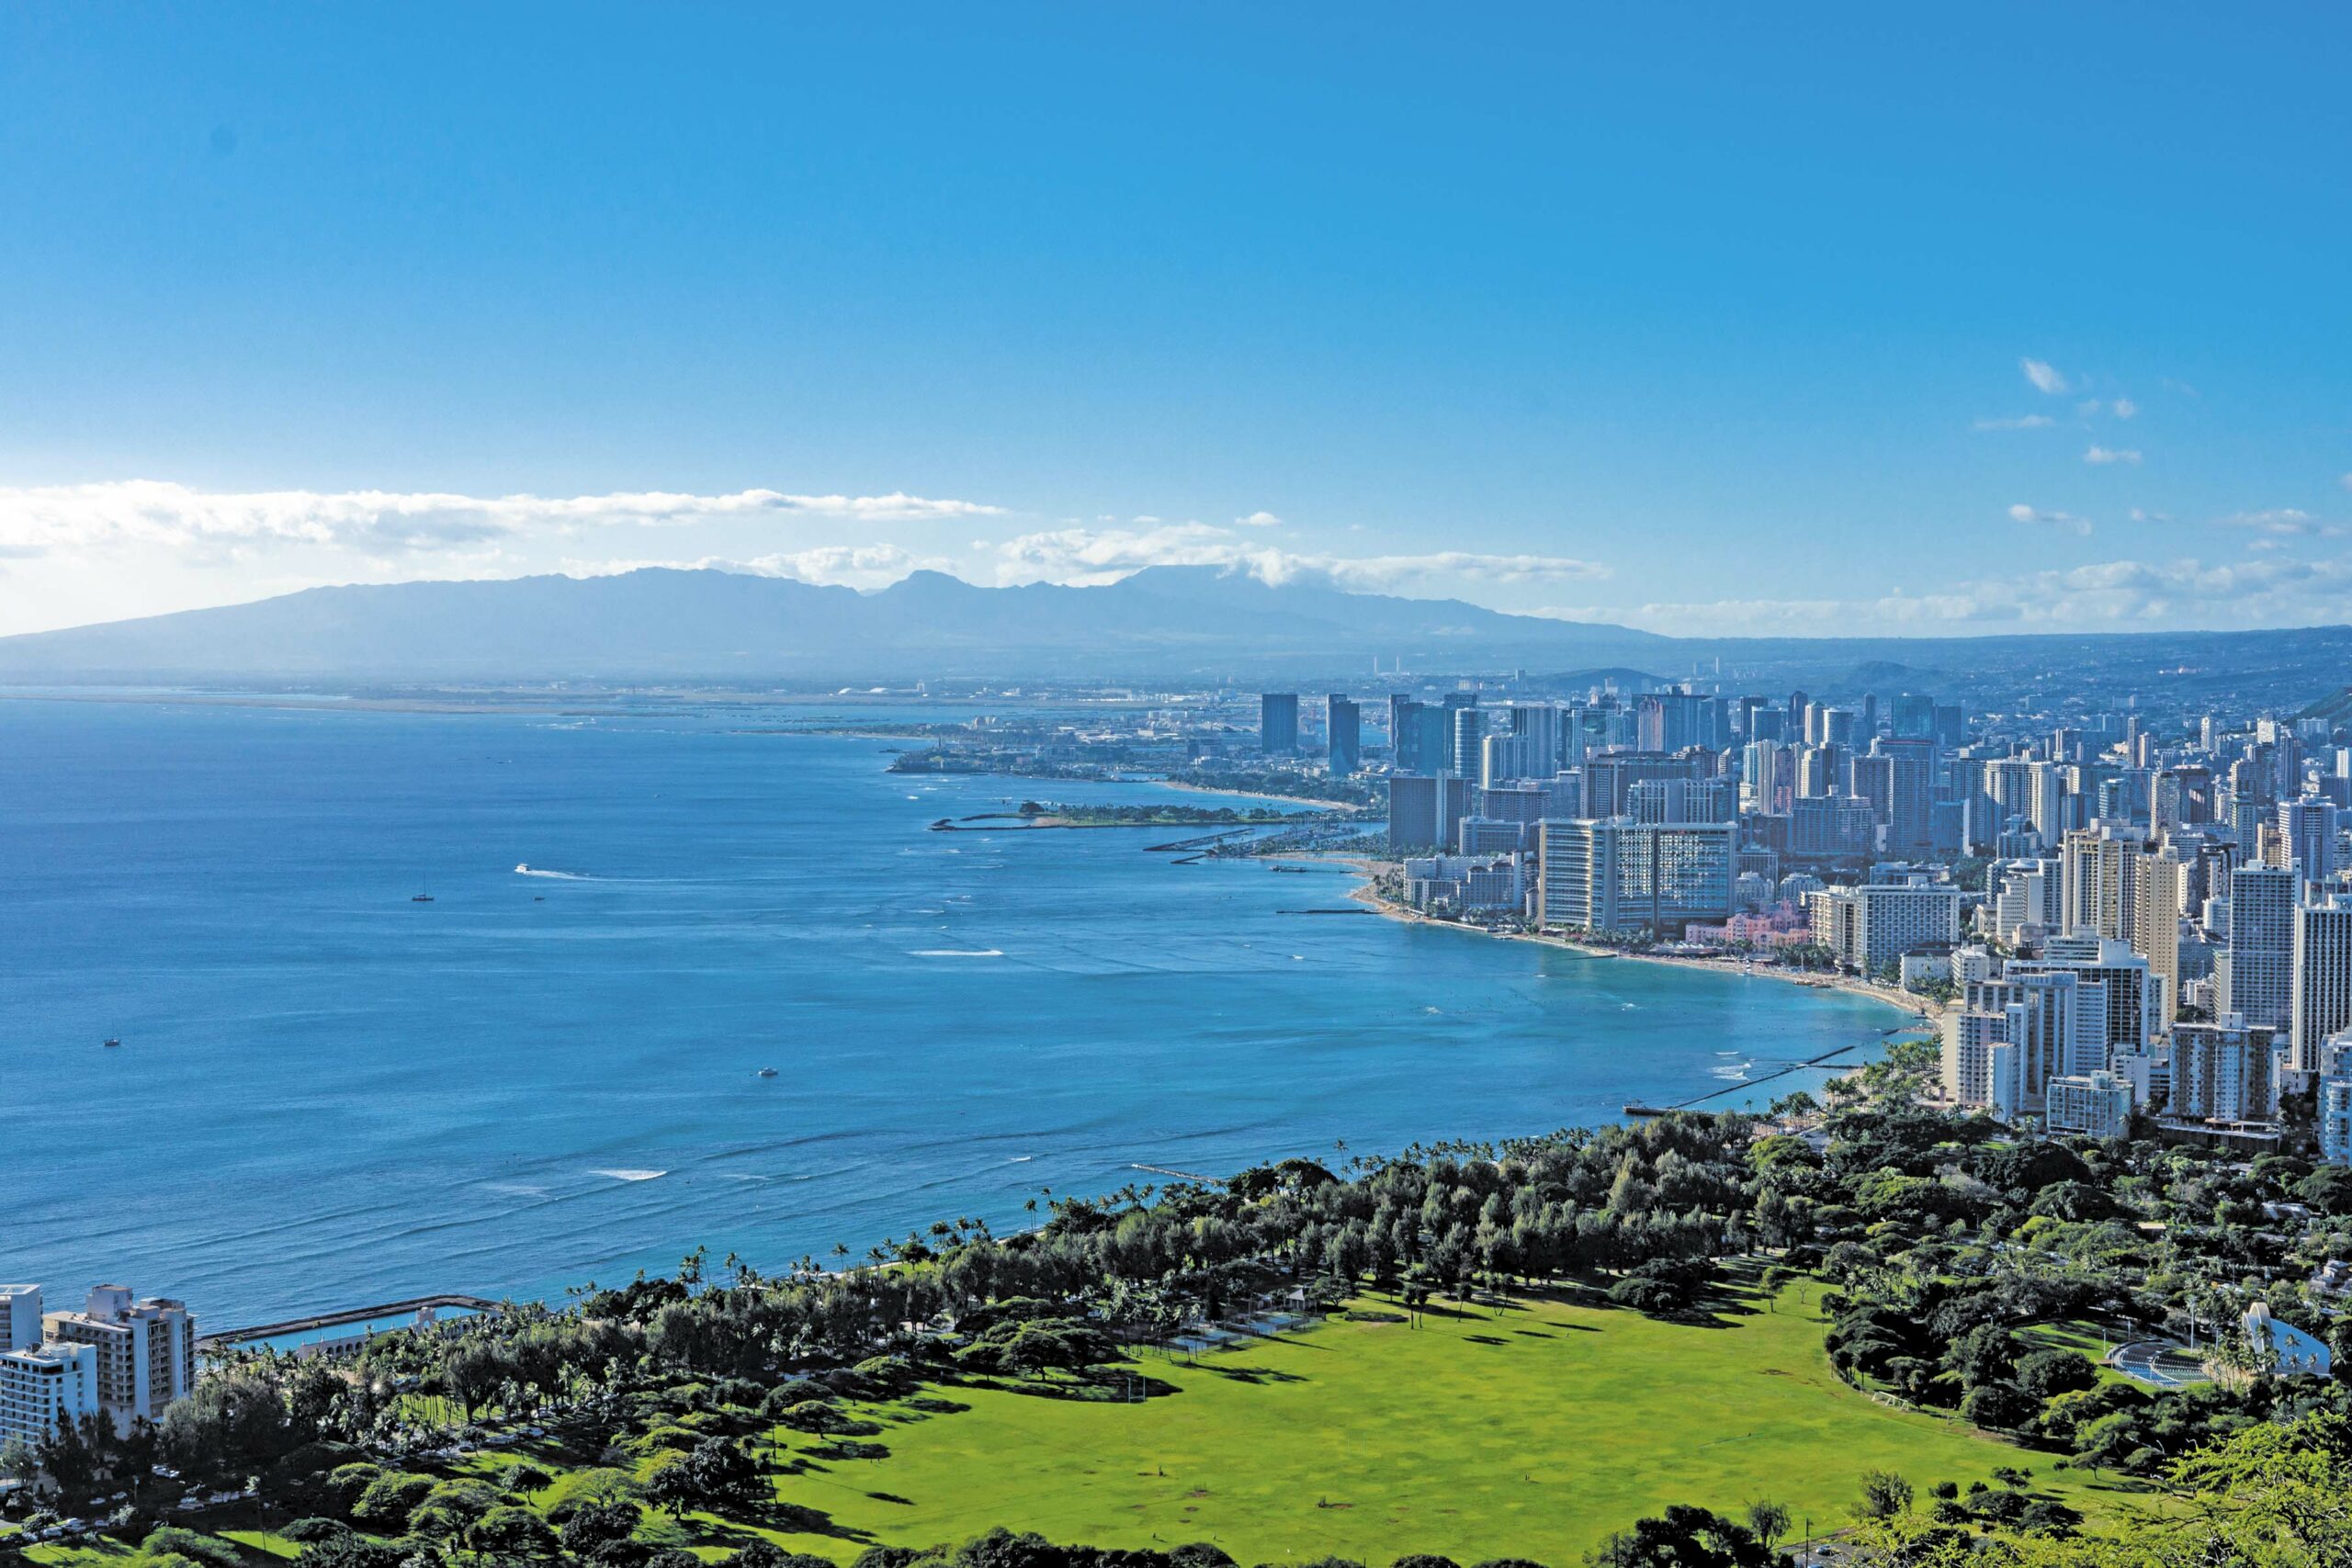 Alumni and friends invited to travel With FHU on a Hawaiian Adventure in 2025